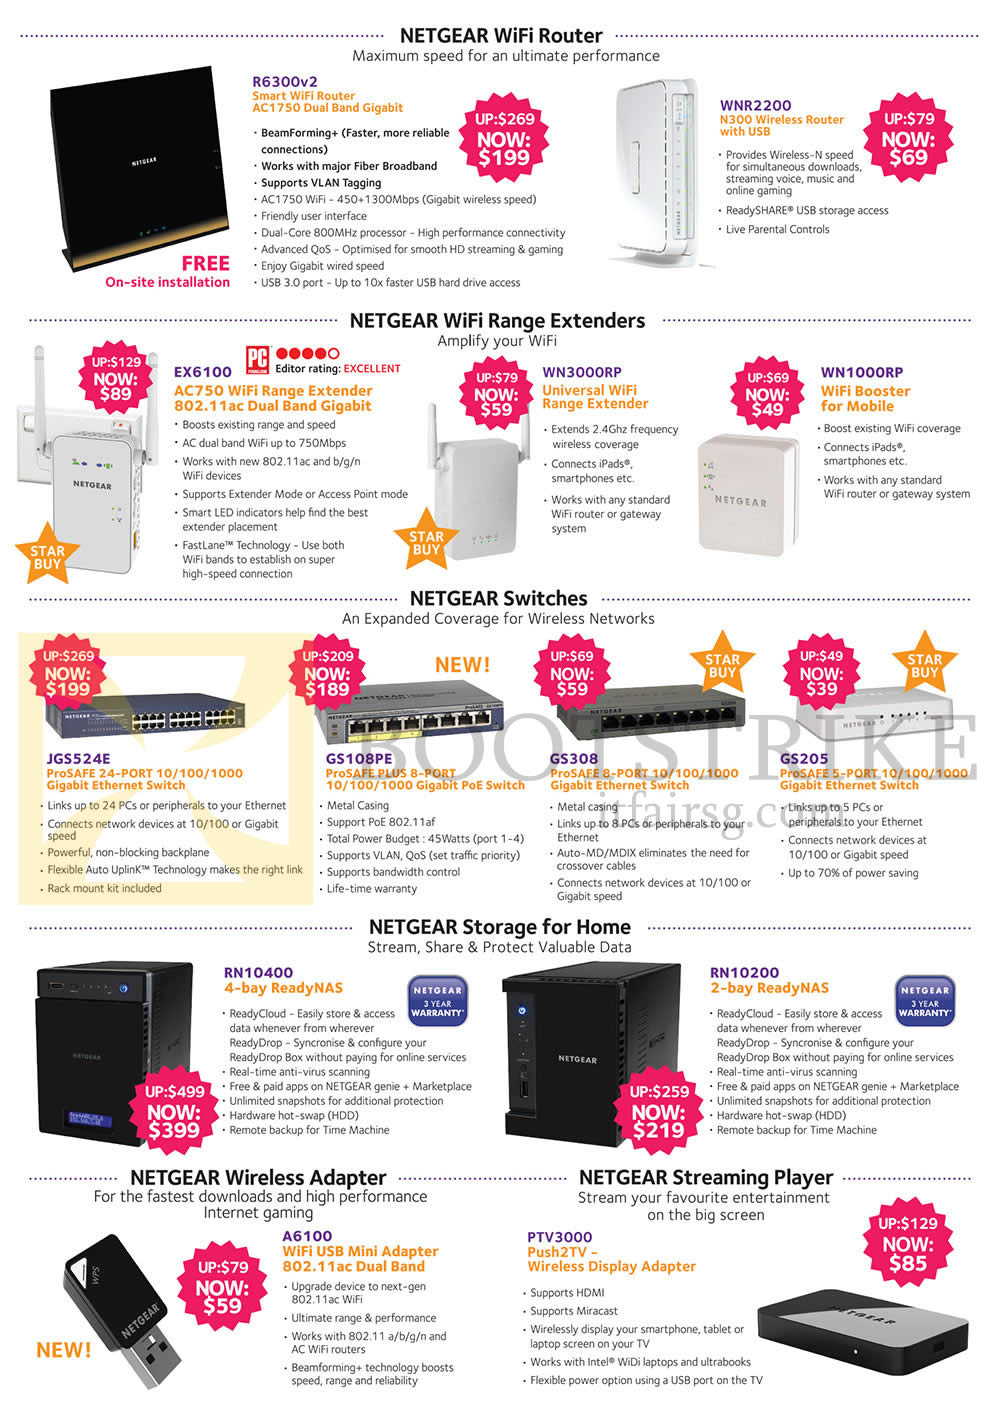 COMEX 2014 price list image brochure of Harvey Norman Netgear Networking Wireless Routers, Range Extenders, Switches, Storage, USB Adapter, Streaming Player